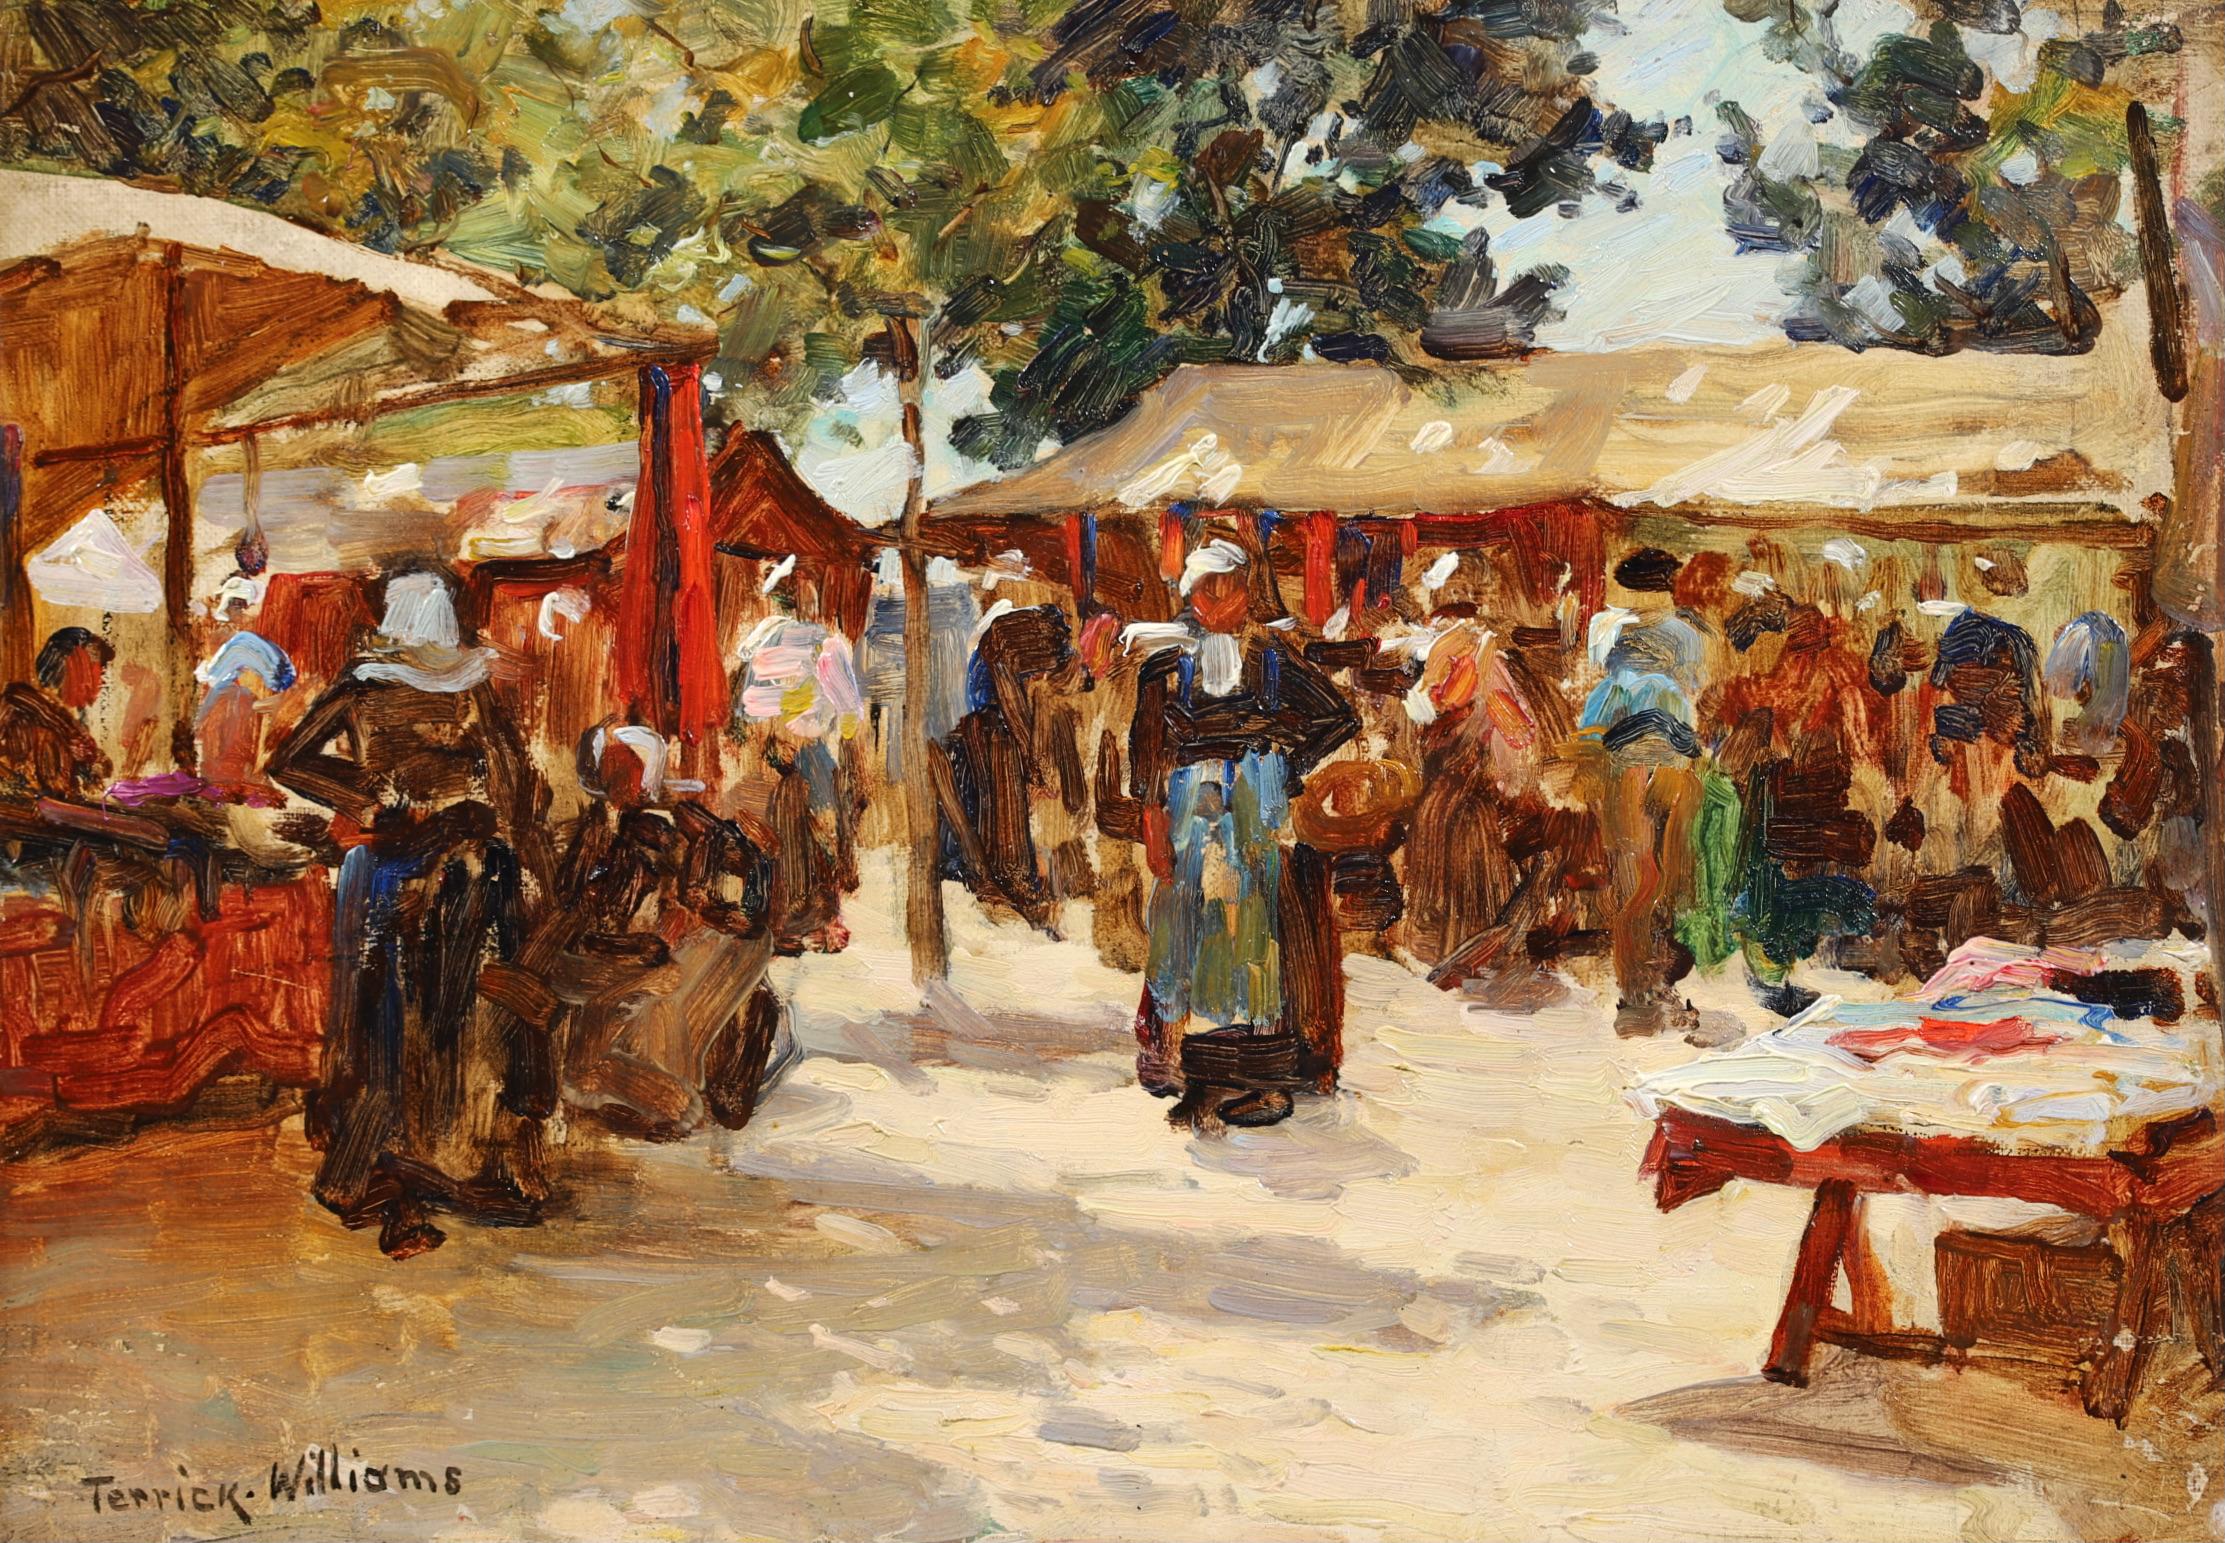 Signed figures in landscape oil on canvas circa 1900 by English painter Terrick John Williams. The work depicts women in a market in Normandy on a bright summer's day. 

Signature:
Signed lower left

Dimensions:
Framed: 17